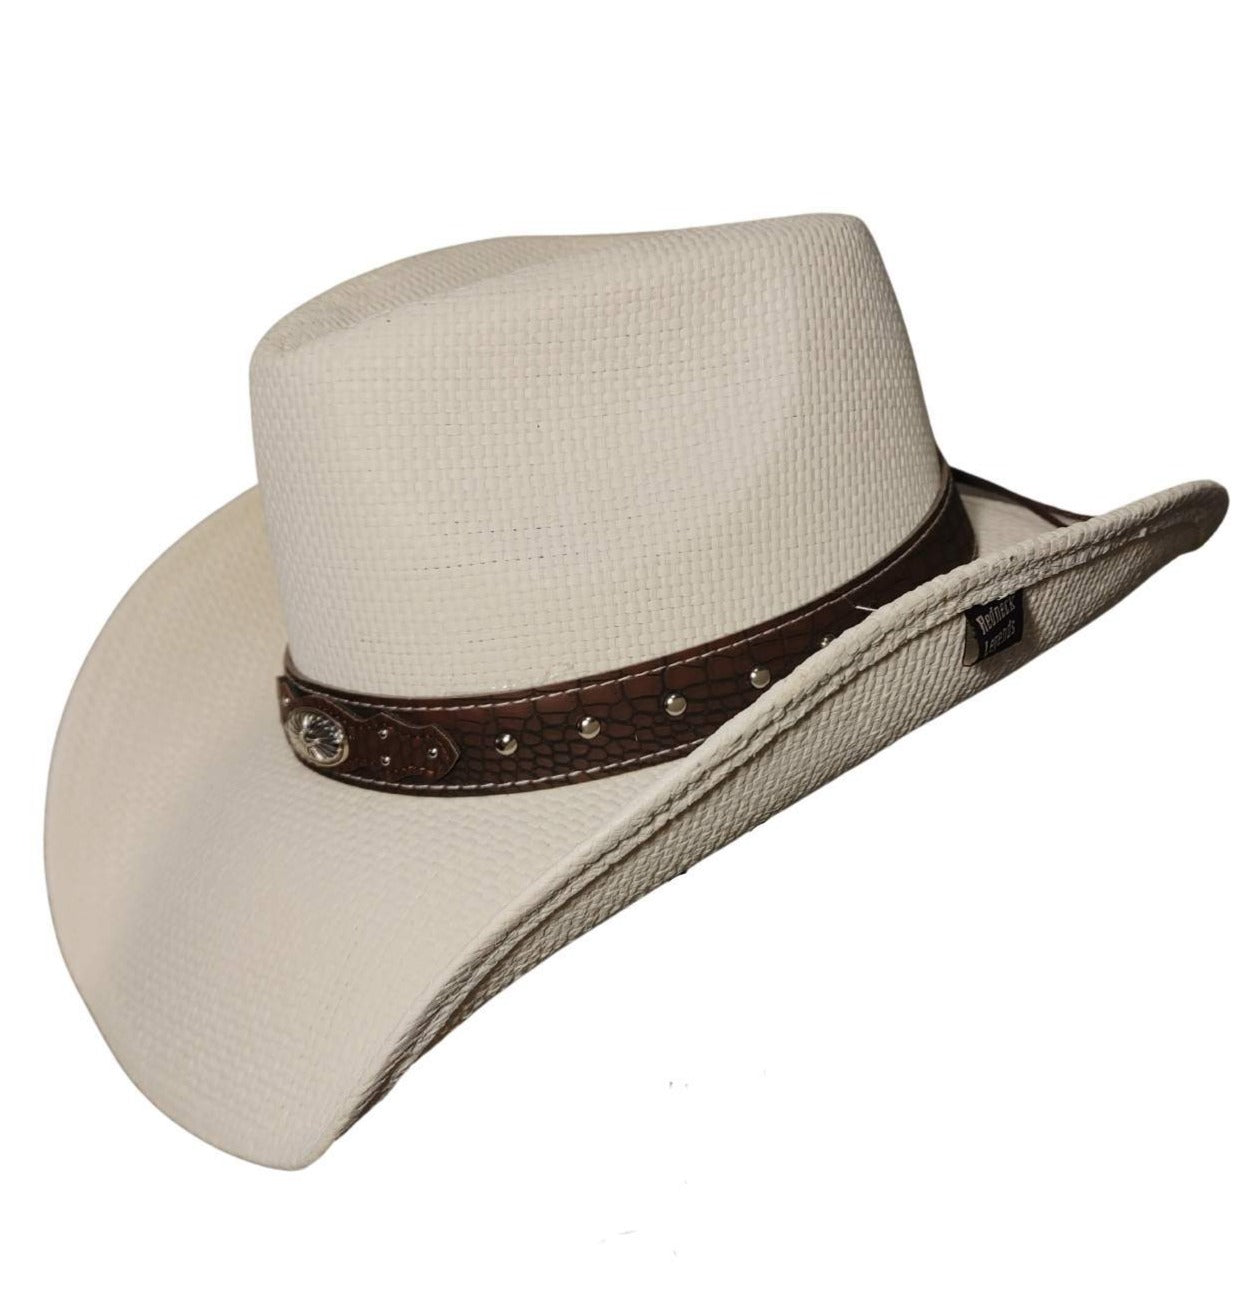 White Cowboy Hat with Leather Band